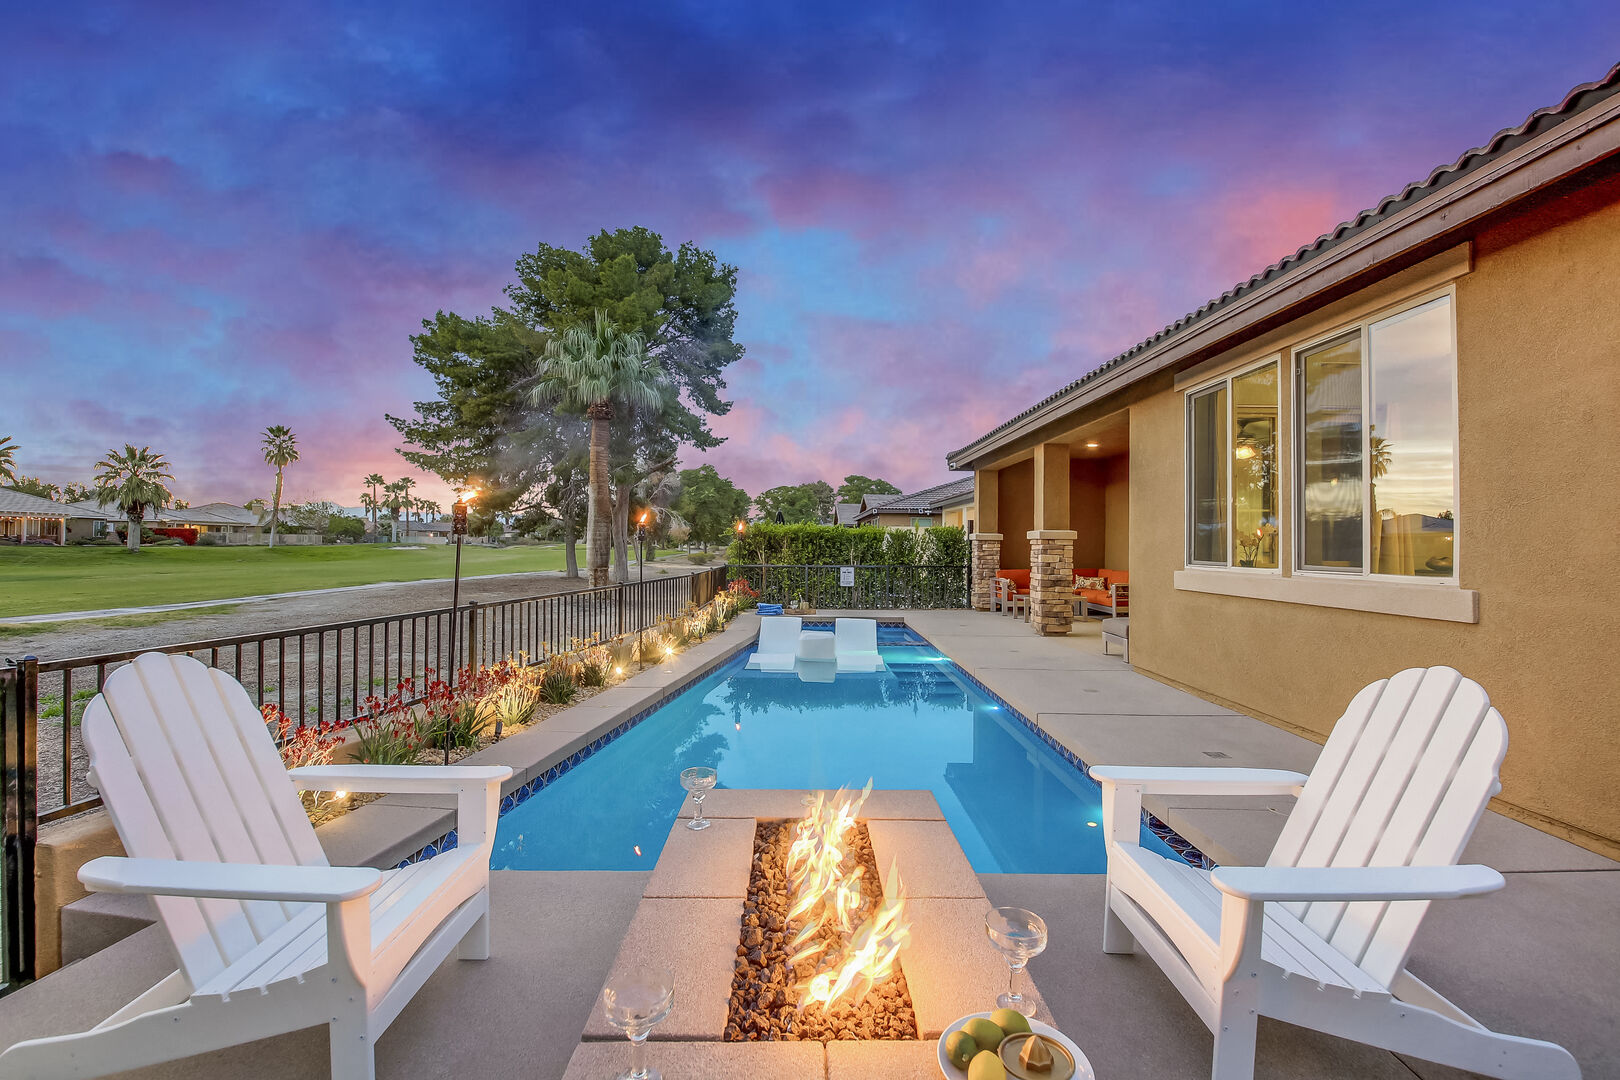 Relax and unwind in this gorgeous backyard with stunning views.